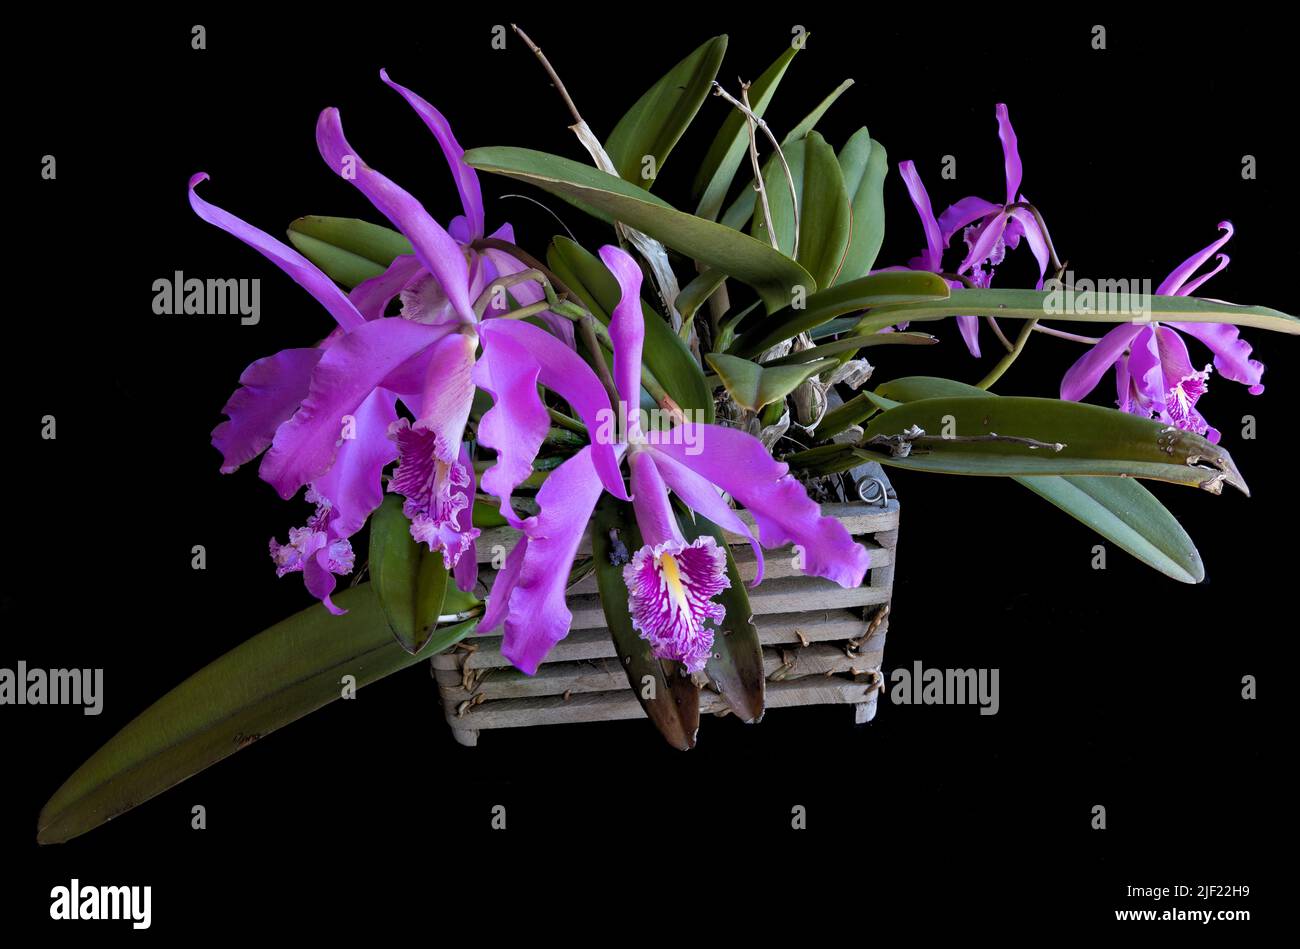 Pink cattleya orchid blossoms against a black background Stock Photo